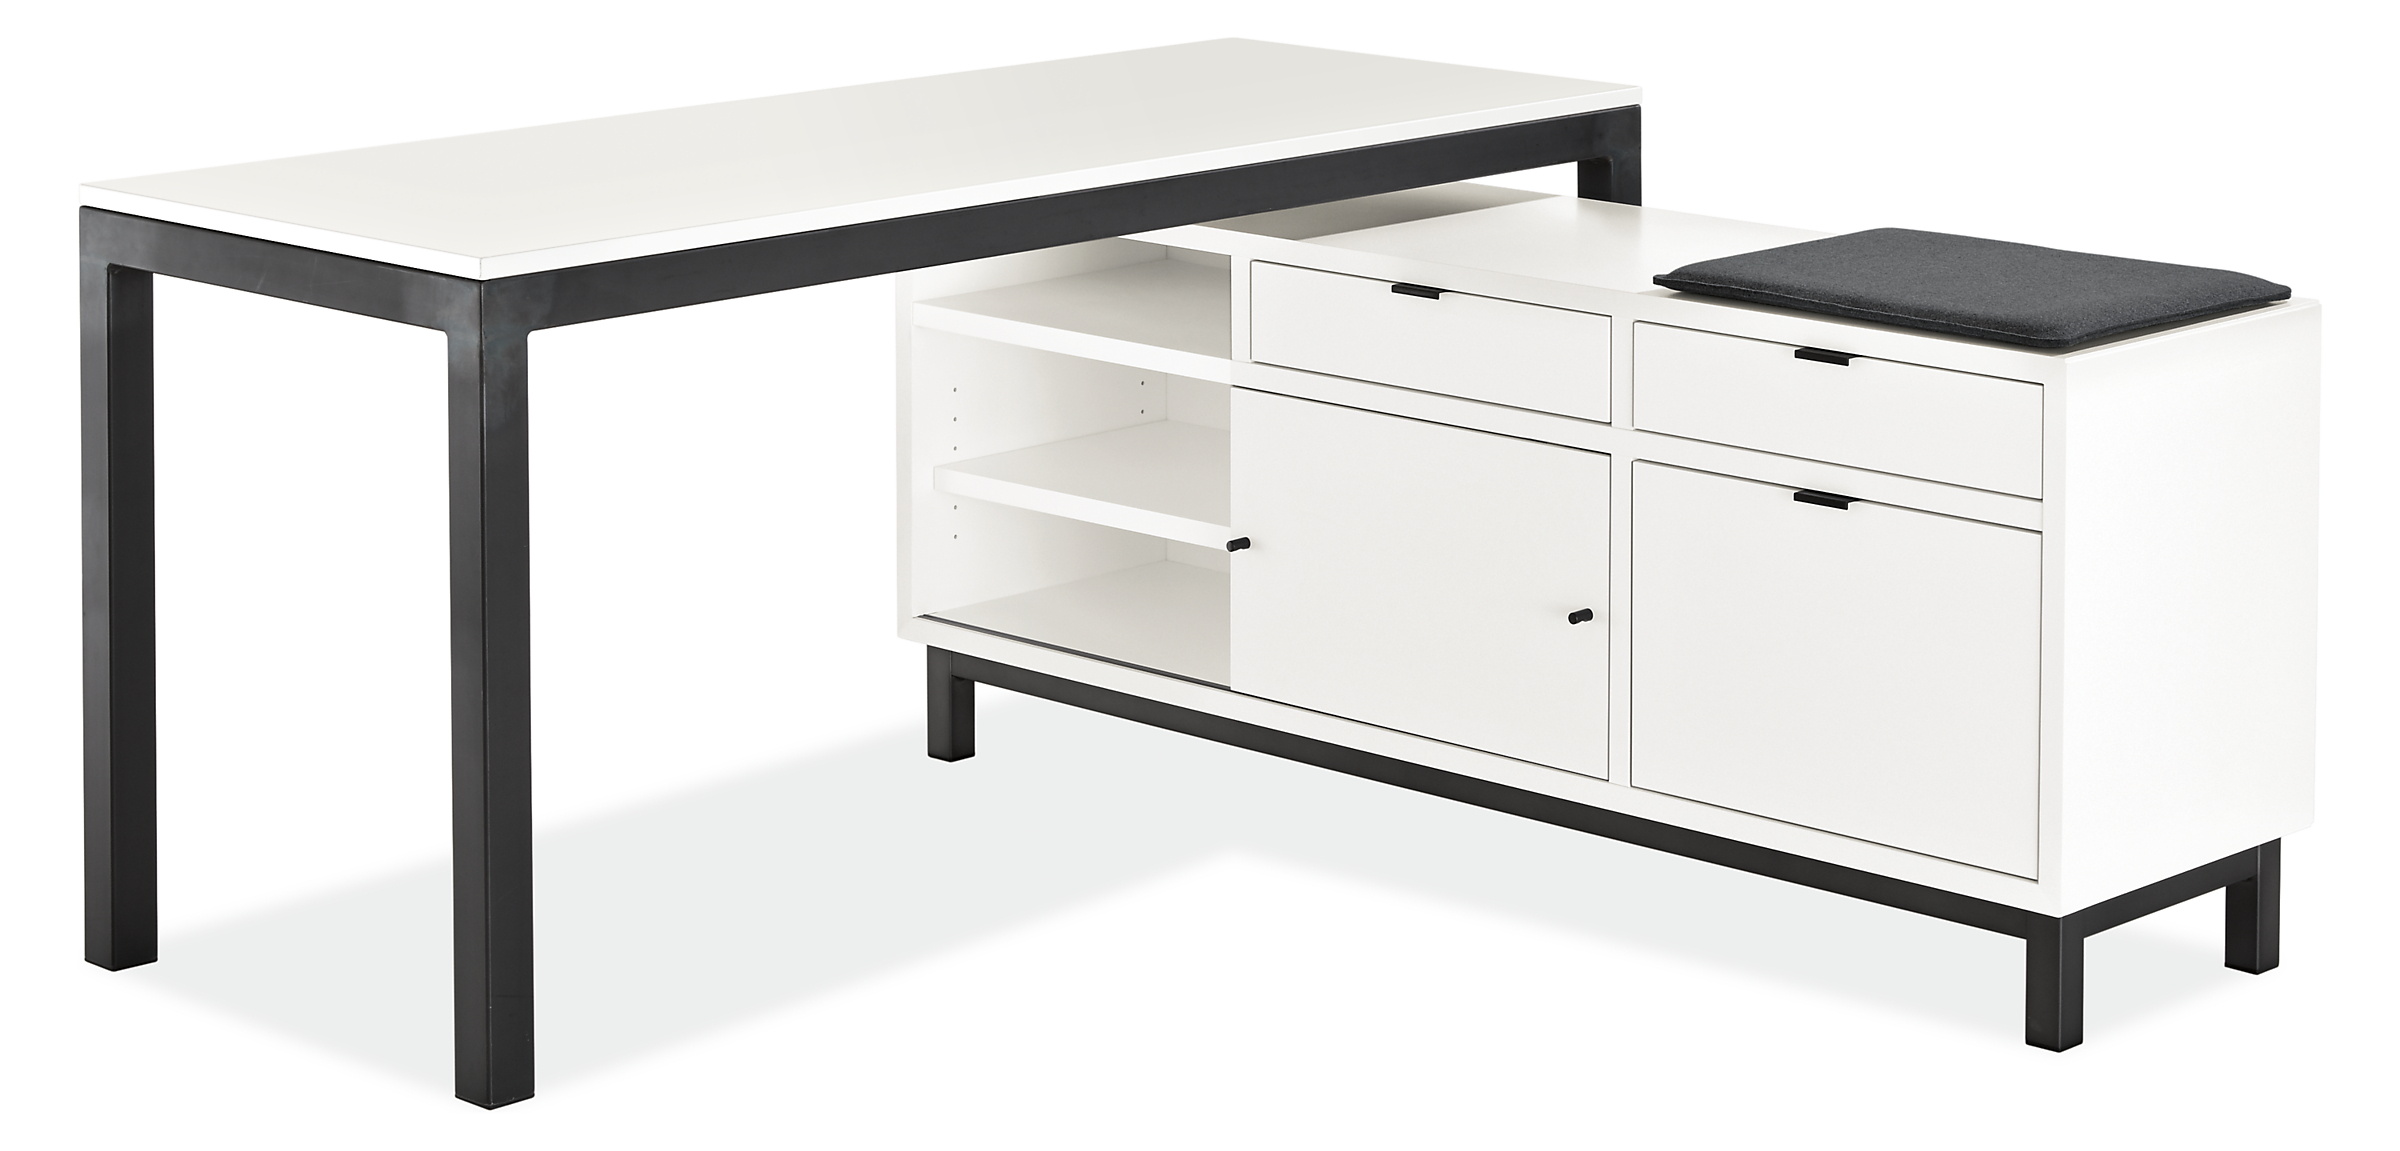 Copenhagen 60w 16d 25h Right-File Drawer Bench with Cushion and Parsons 60w 24d 29h Table.